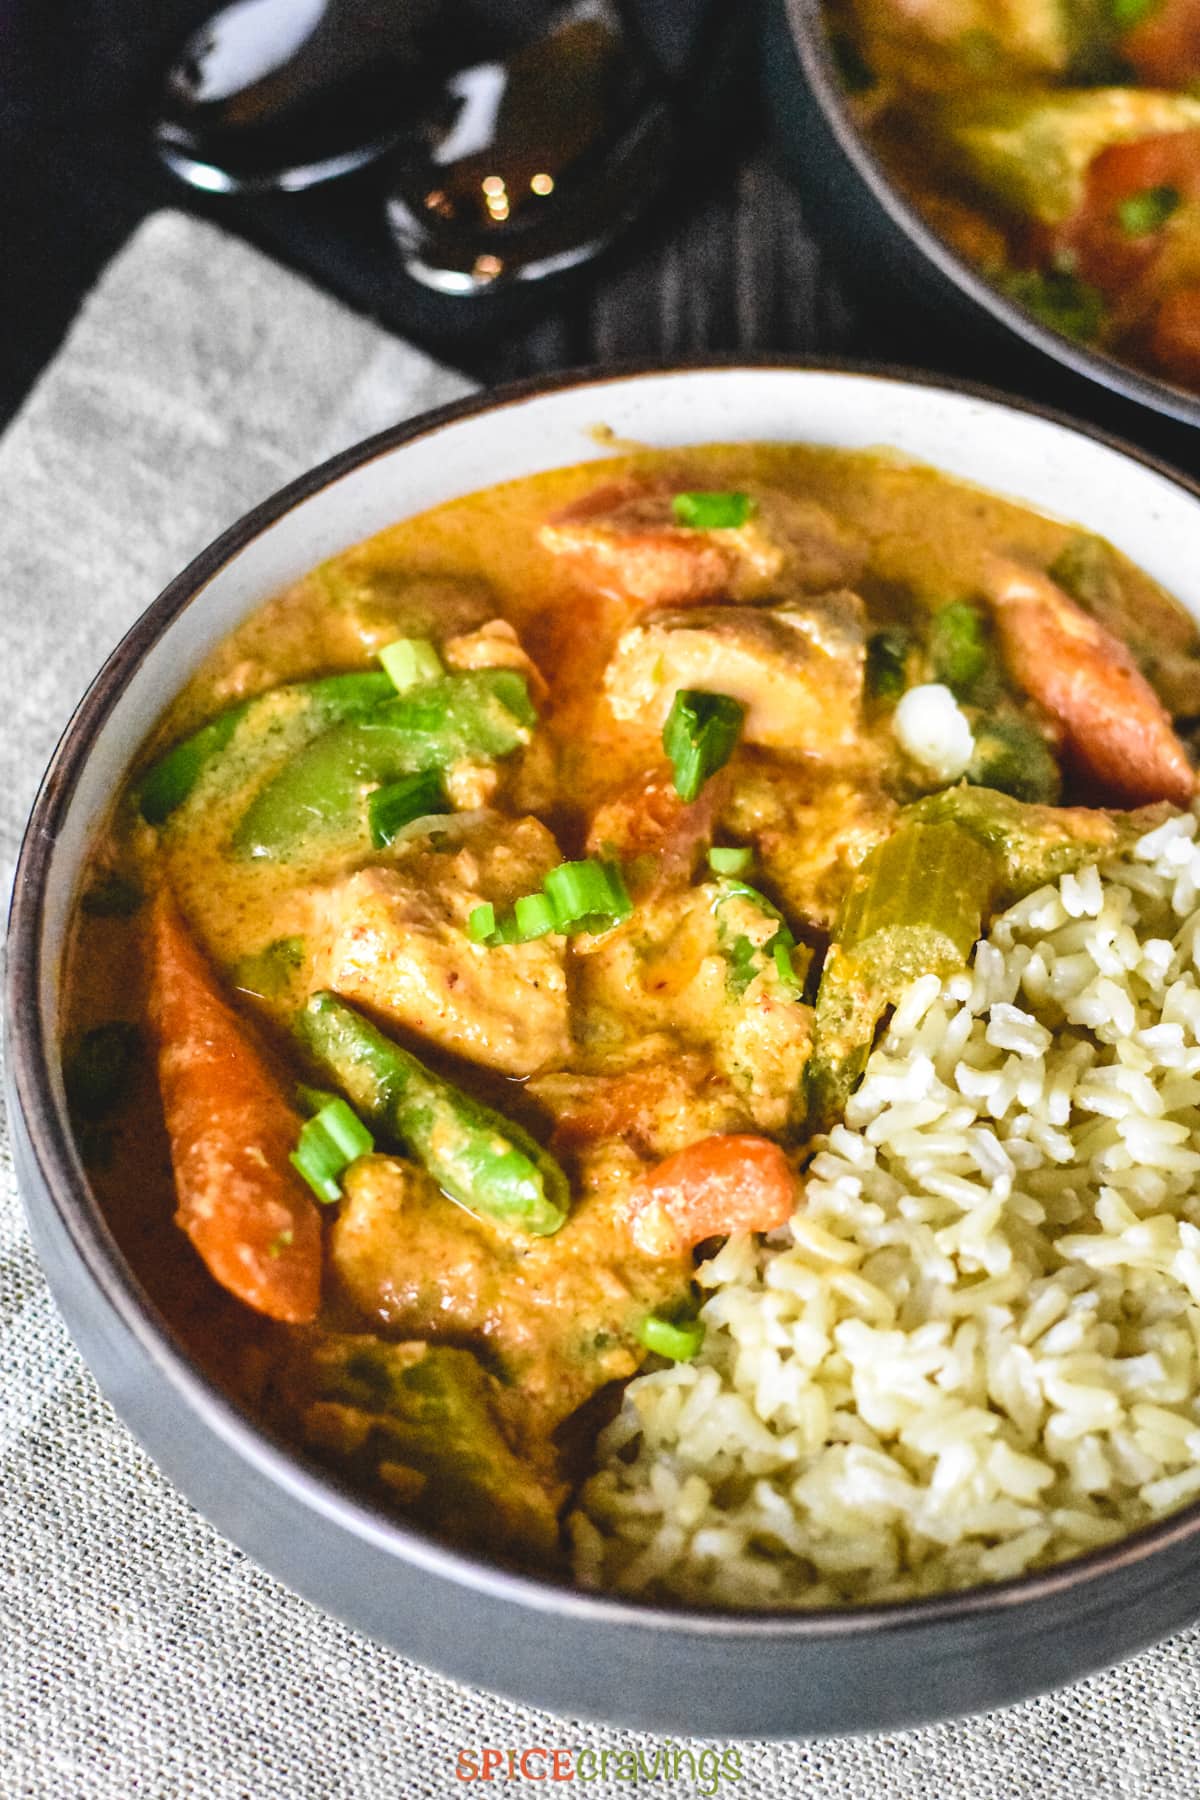 Salmon chunks cooked in coconut milk and red curry paste with crunchy vegetables like celery, carrots and snap peas, and served with brown jasmine rice